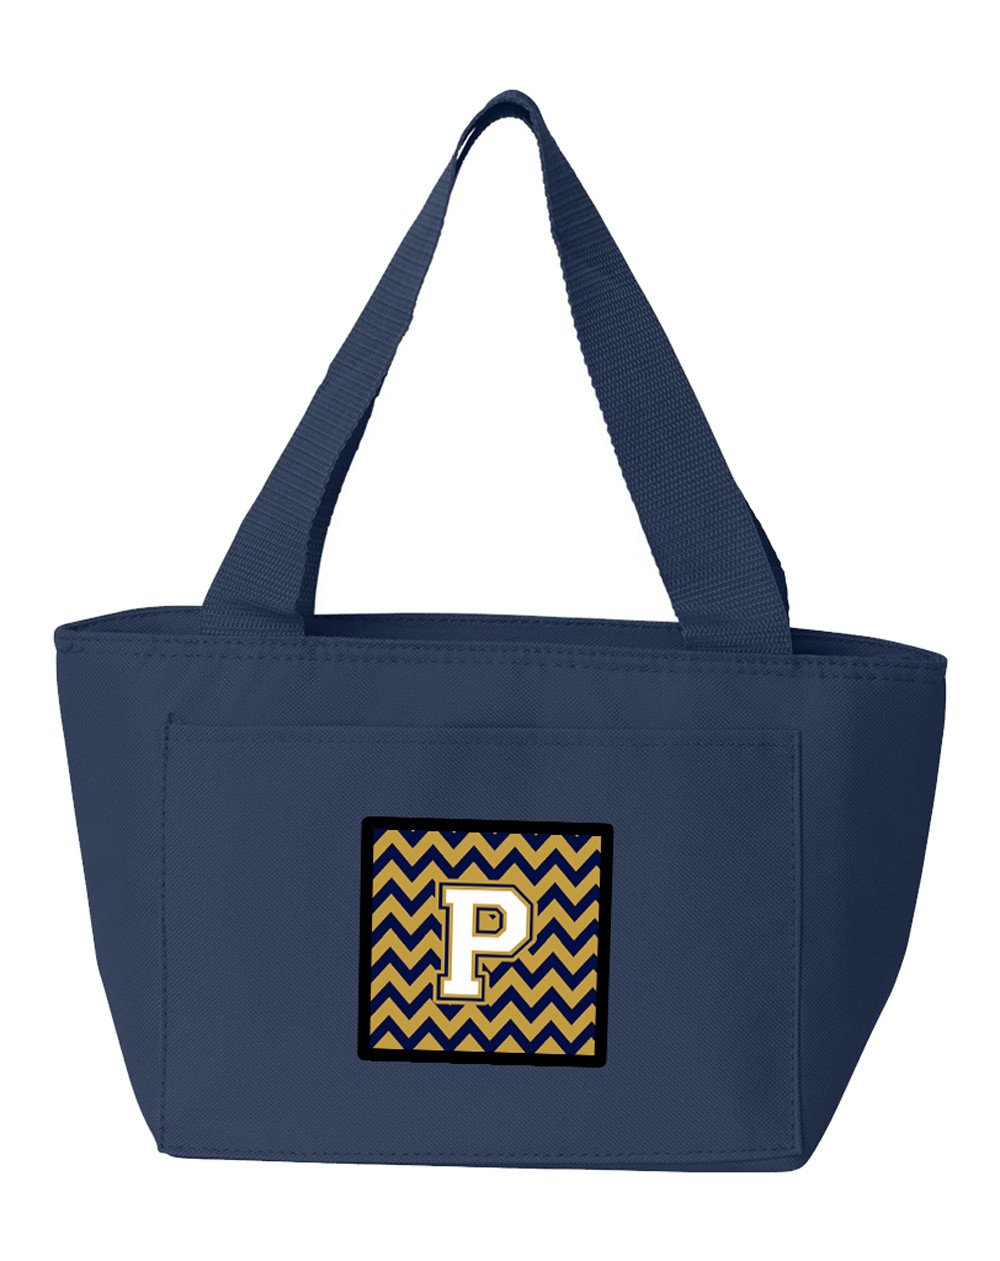 Letter P Chevron Navy Blue and Gold Lunch Bag CJ1057-PNA-8808 by Caroline's Treasures